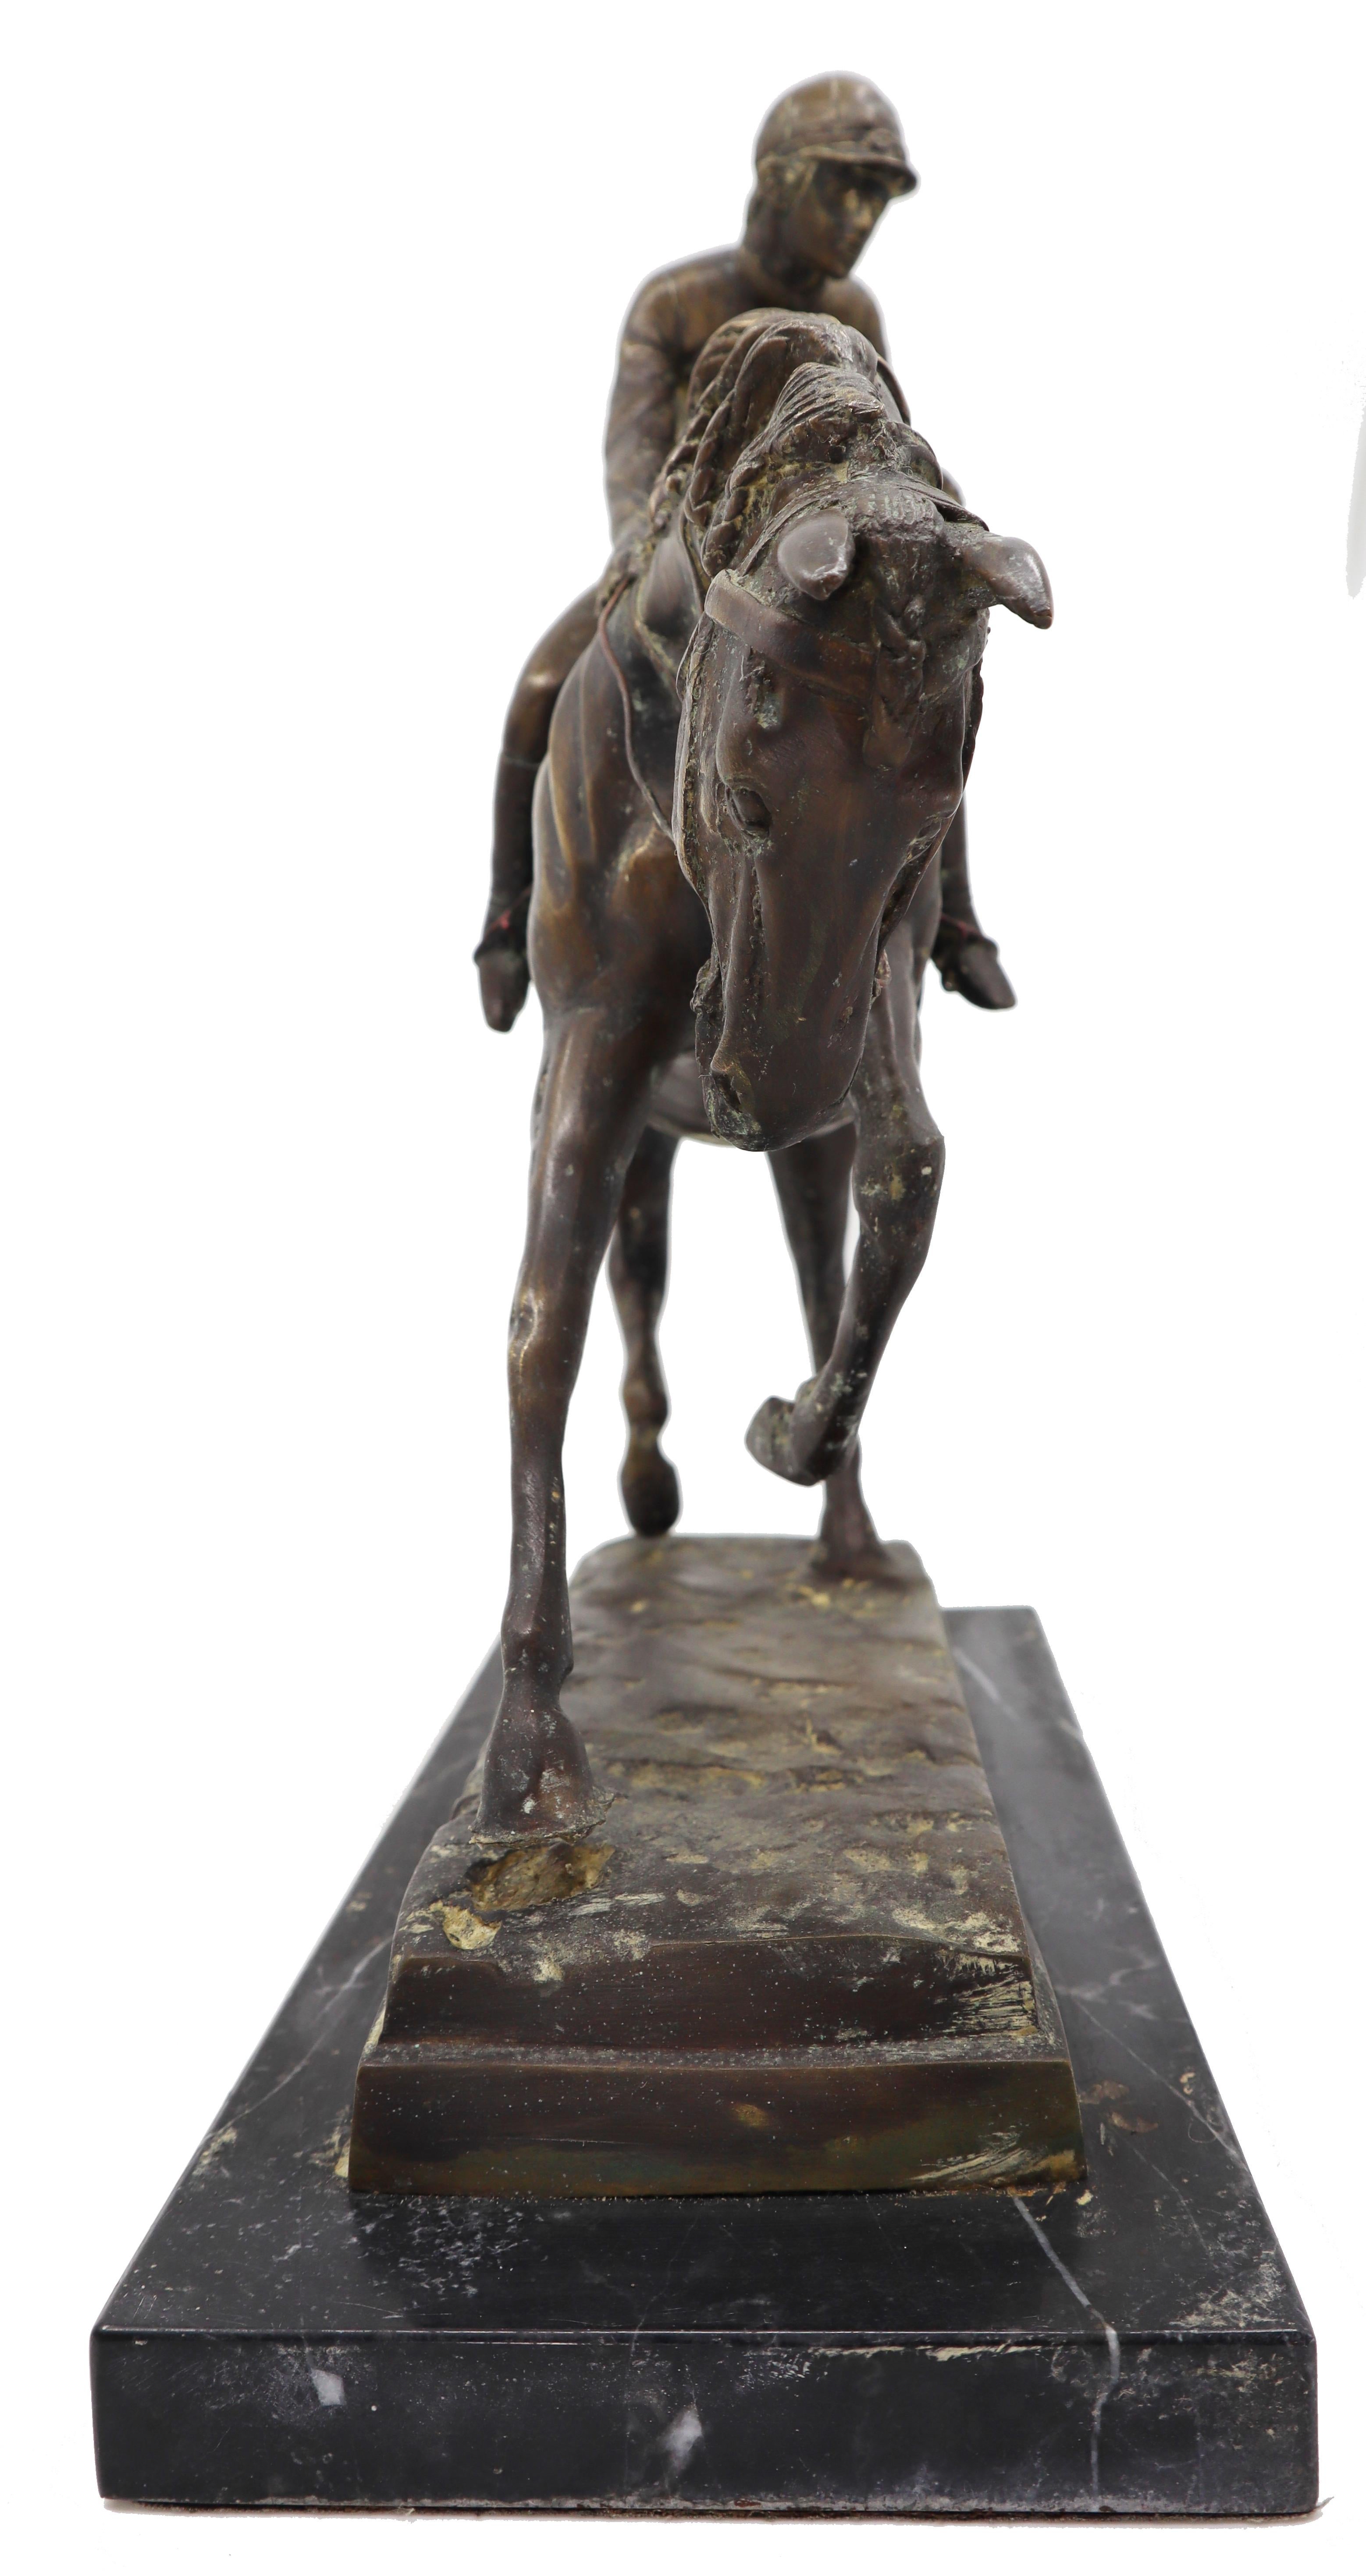 A bronze equestrian statue of a Jockey on his horse beautiful captured movement  
The statue is in excellent condition.  

Dimension Height 33cm x Width 38cm x 14 cm   

Ref. AACB15

*Shipping included  
Free and fast delivery door to door by